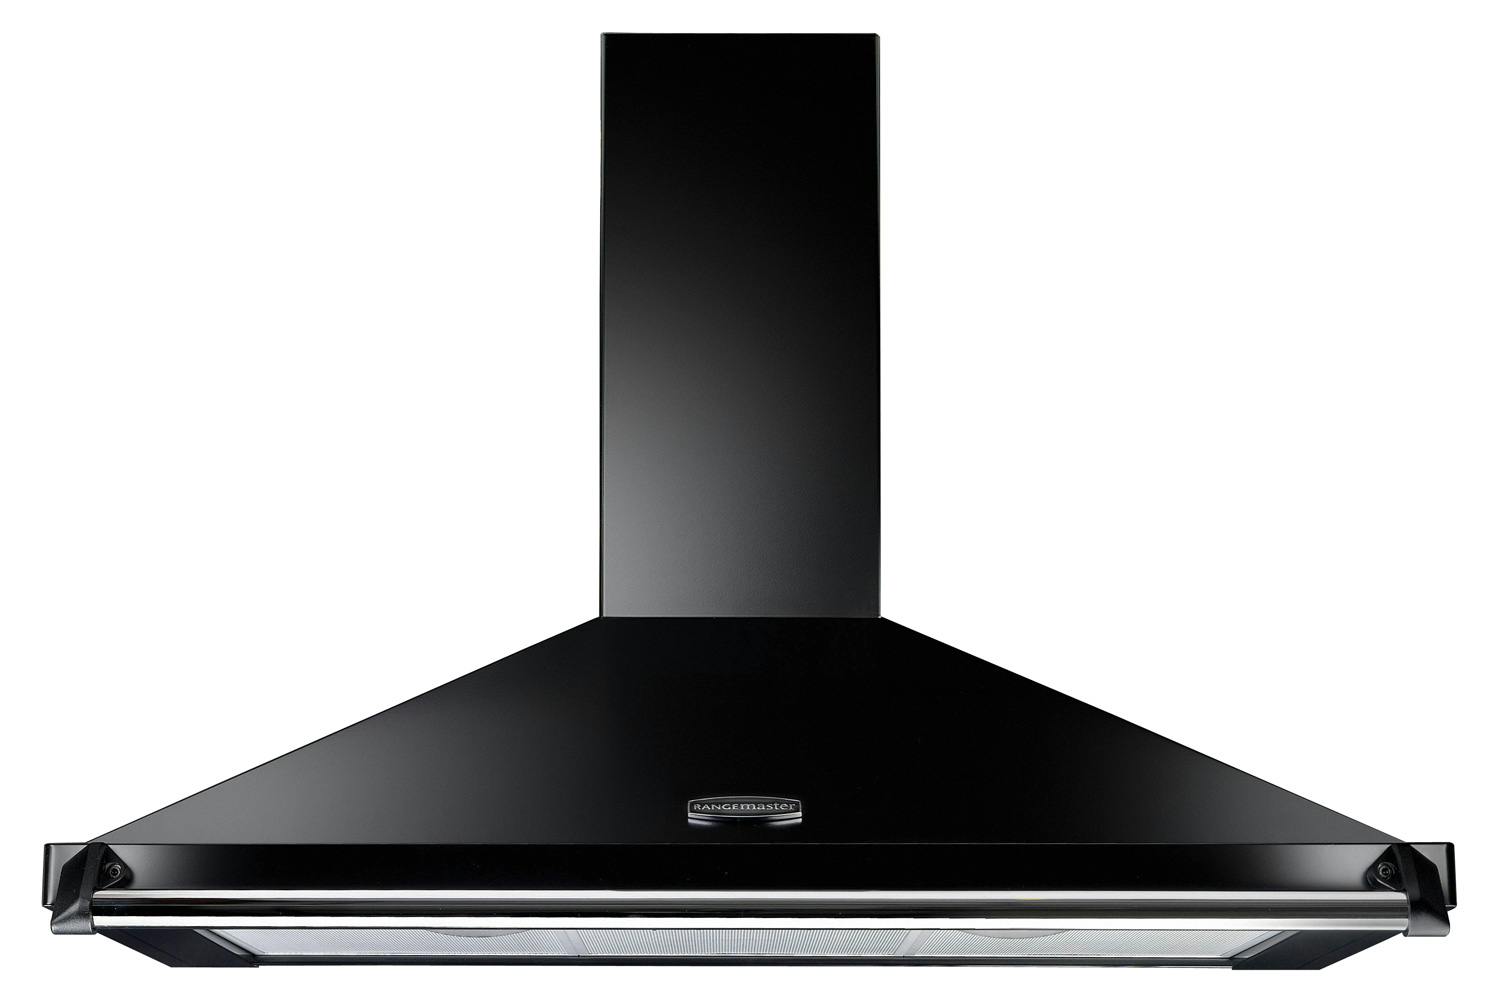 Rangemaster Classic Cooker Hood Black With Chrome ?fit=fill&bg=0FFF&w=1500&h=1000&auto=format,compress